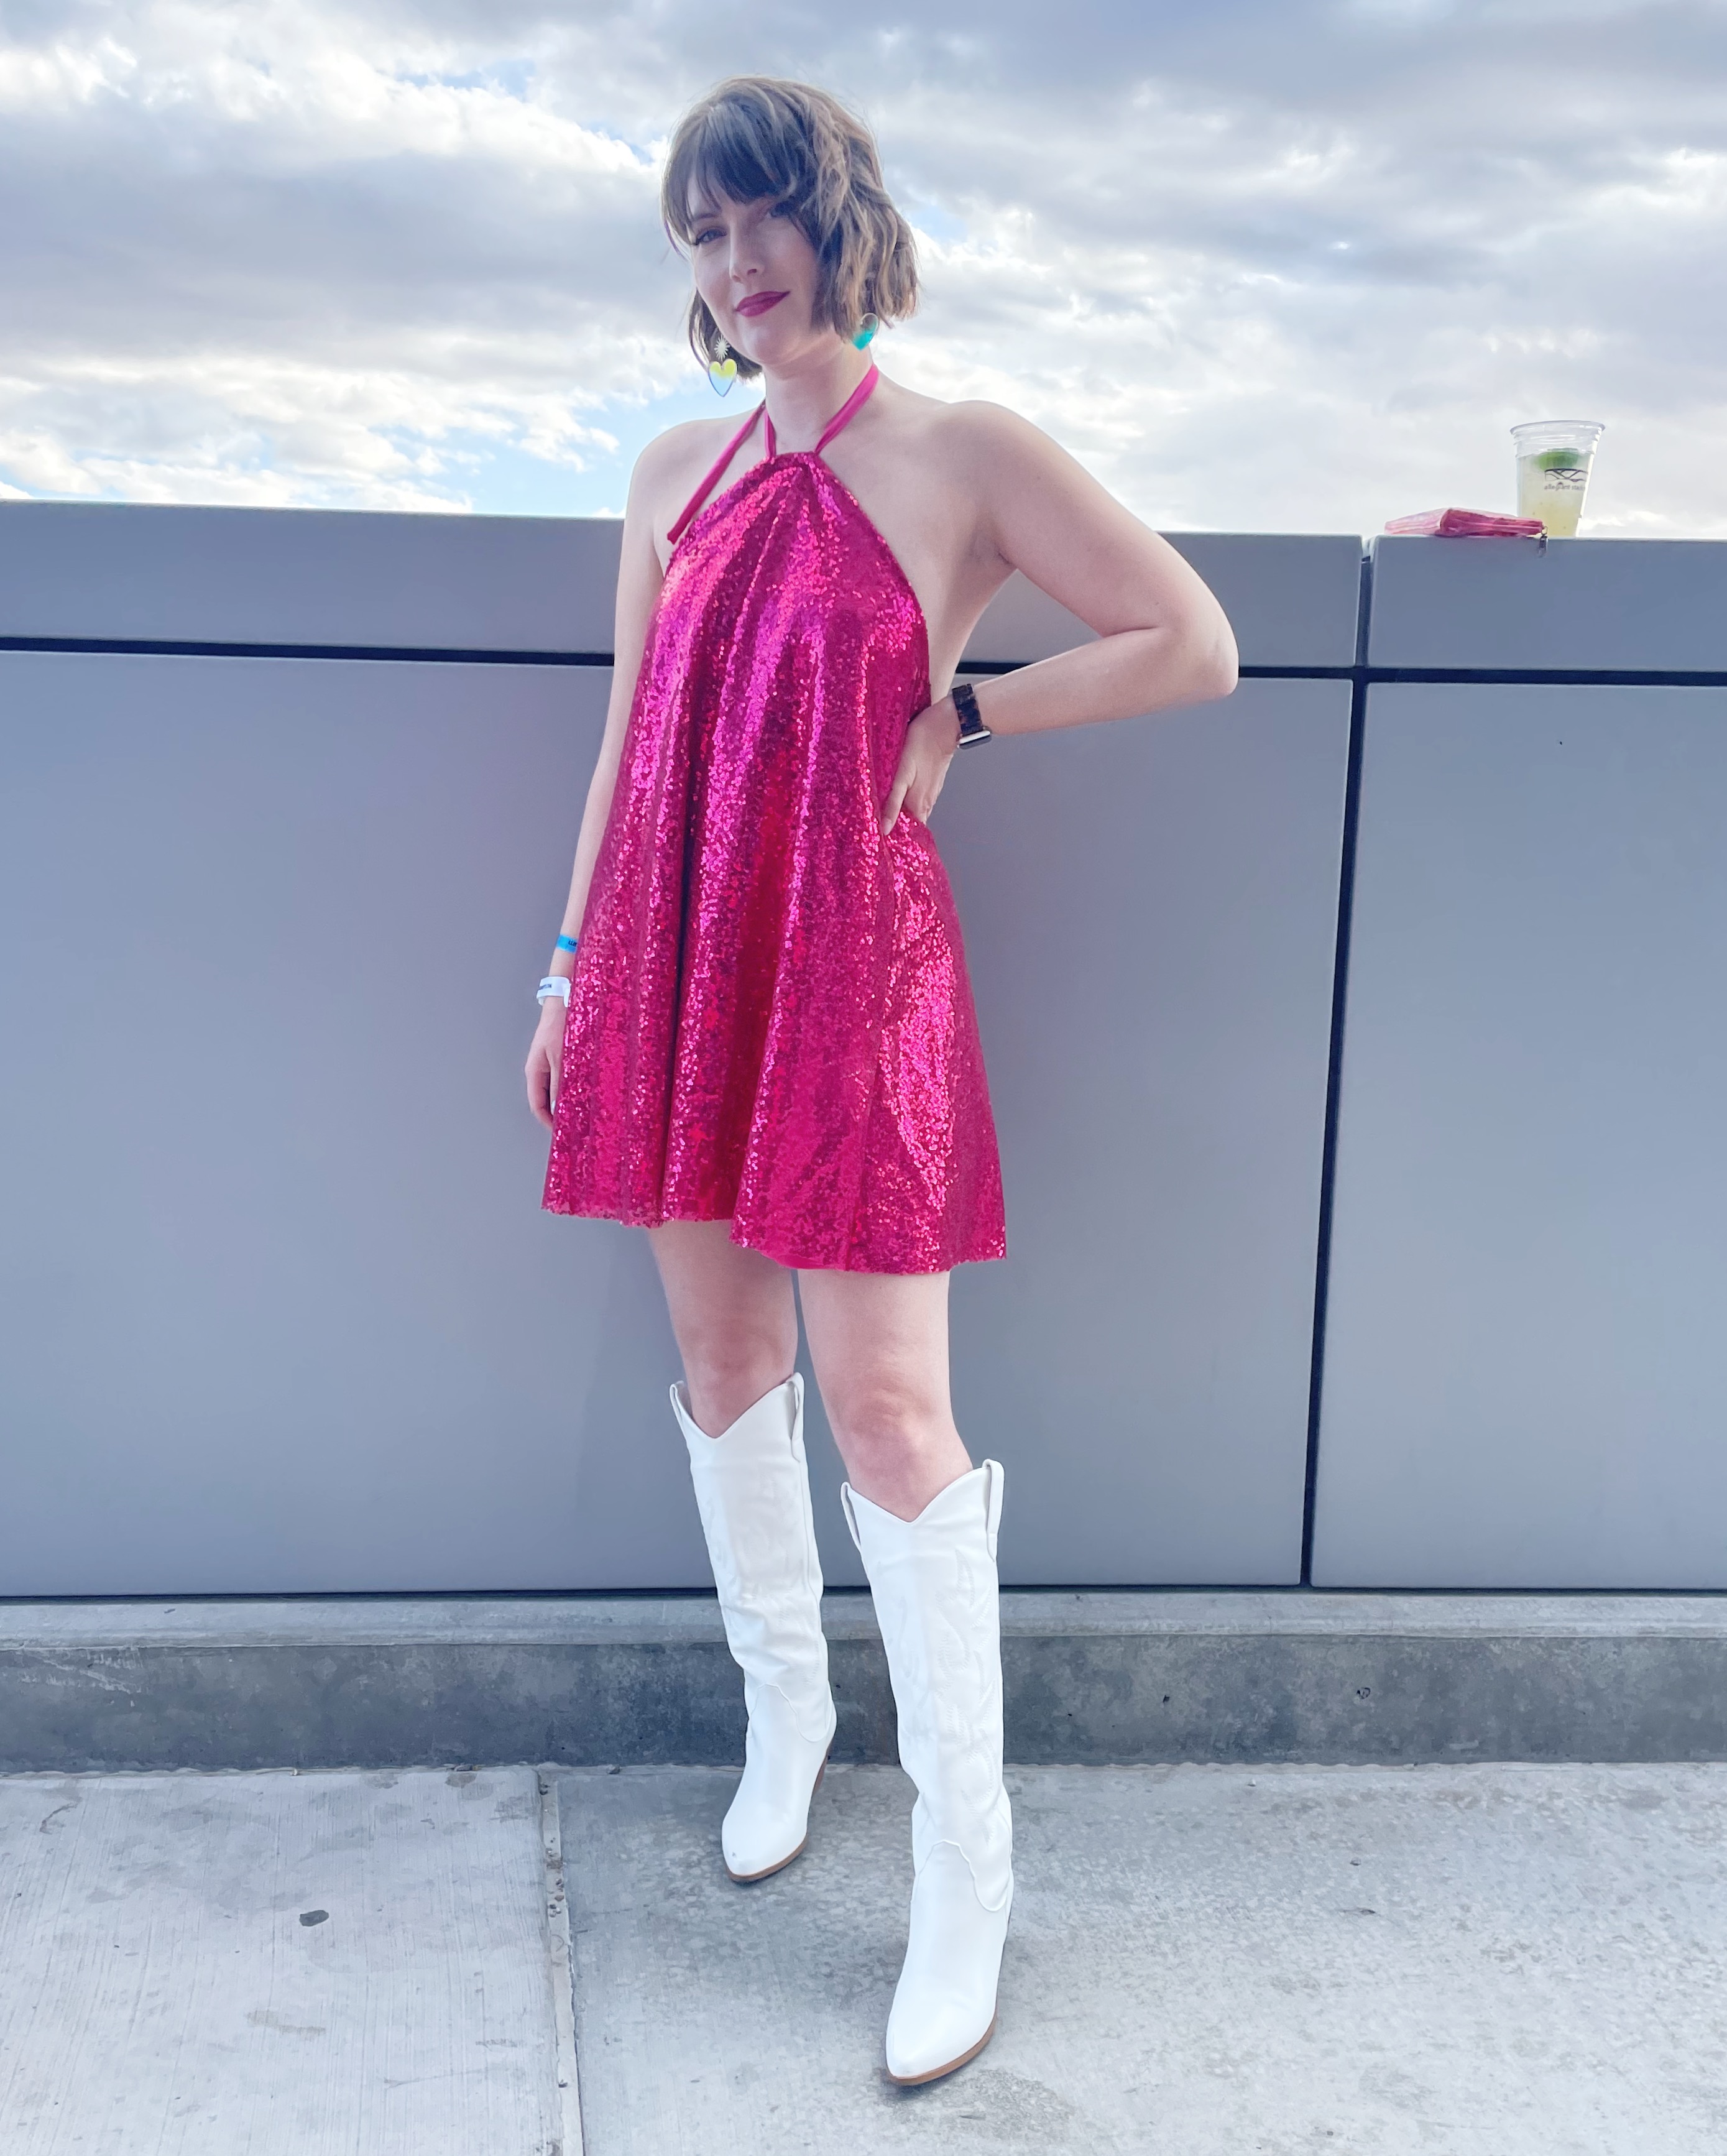 My Taylor Swift Eras Tour Outfit: Pink Sequin Dress